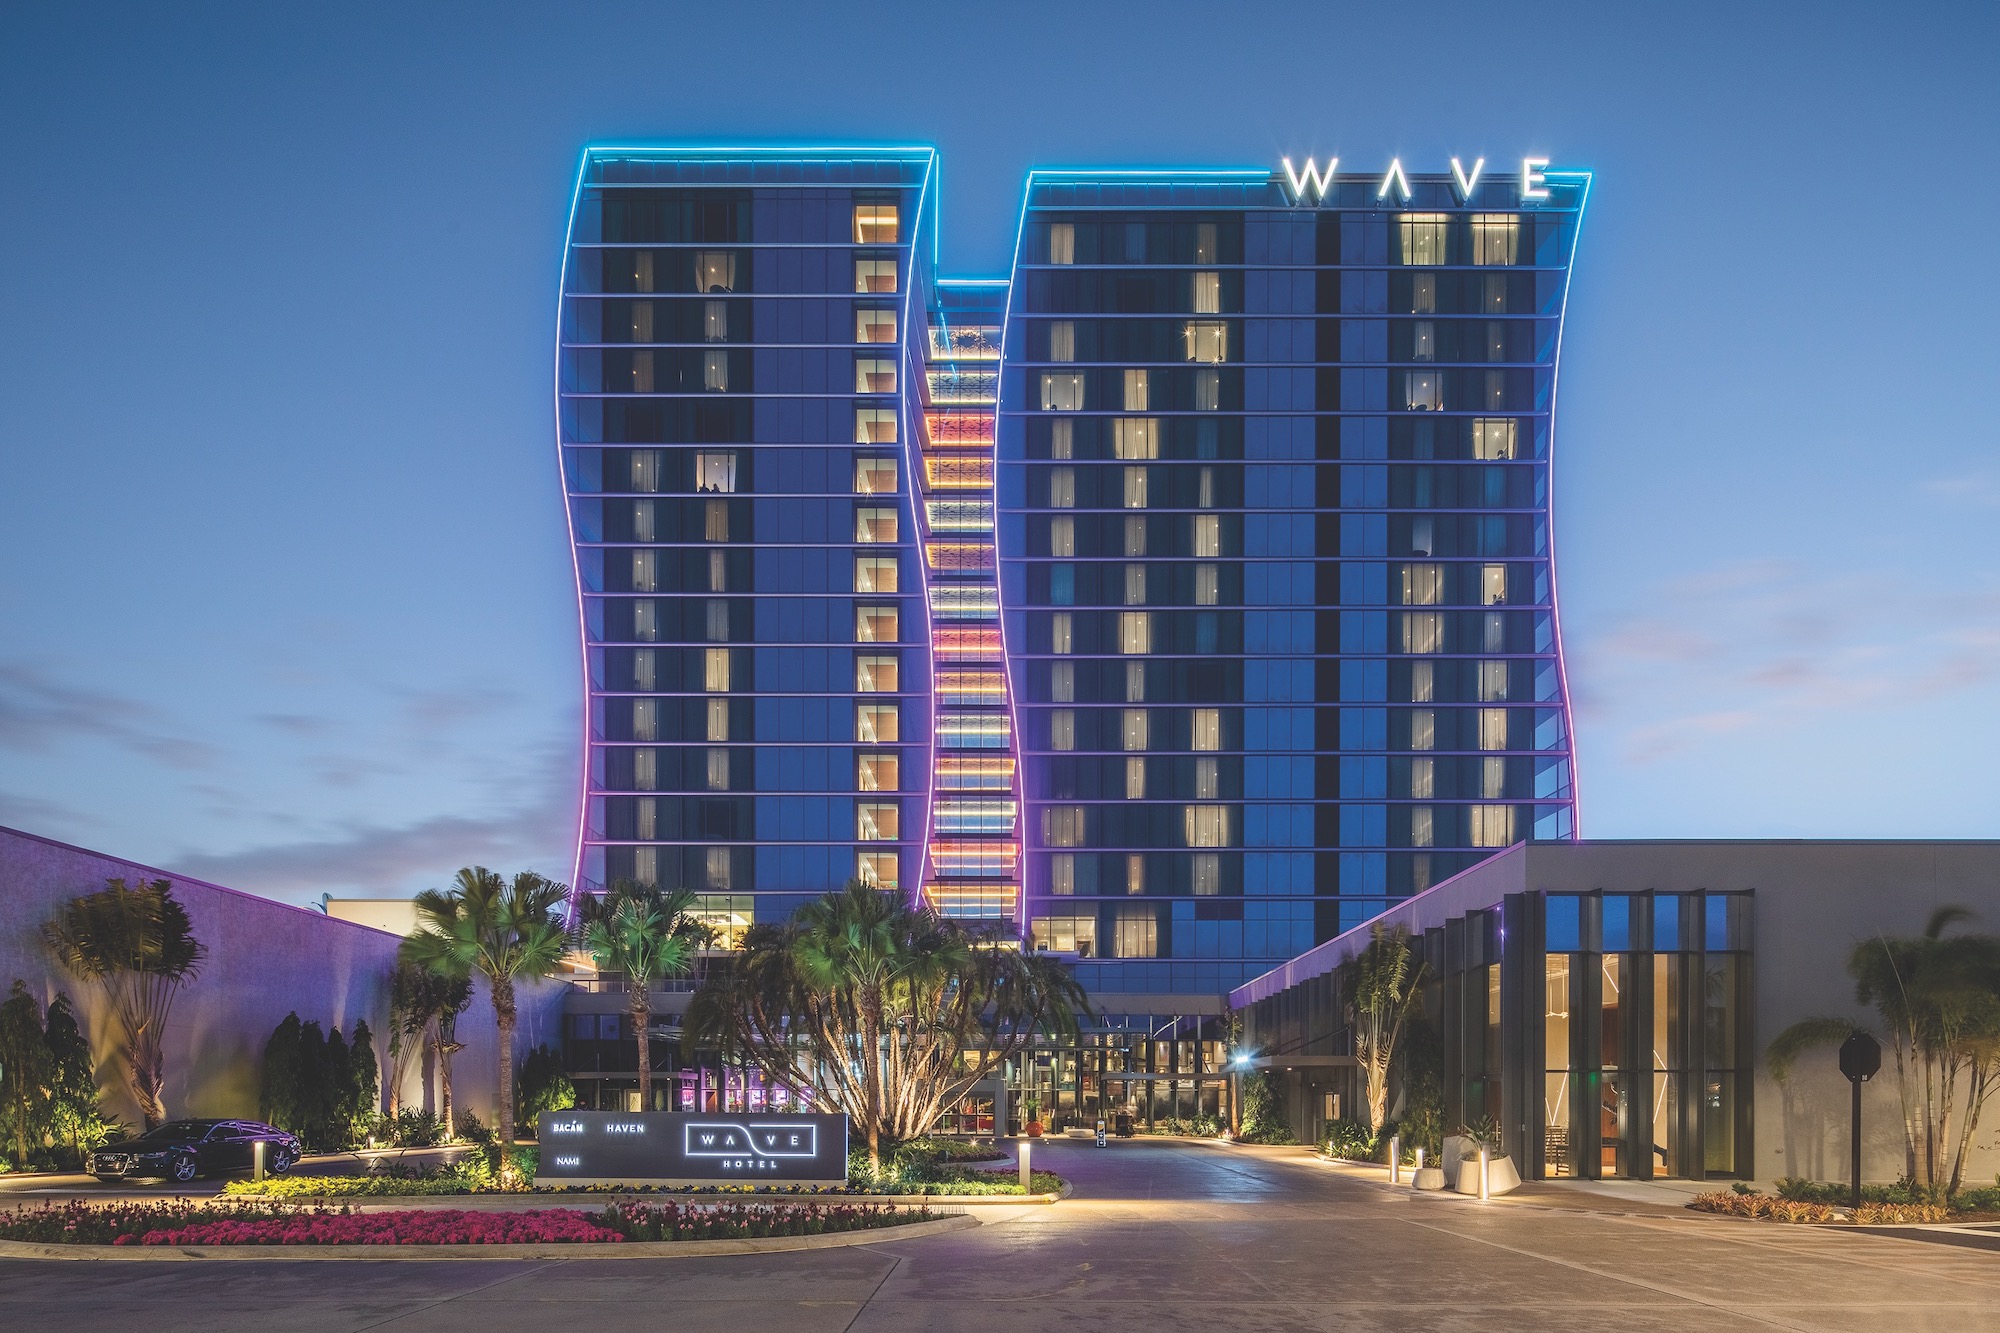 Hotel designs feel more like homes these days  Hotel design trends for 2022 *Lake_Nona_Town_Center_Wave_Hotel